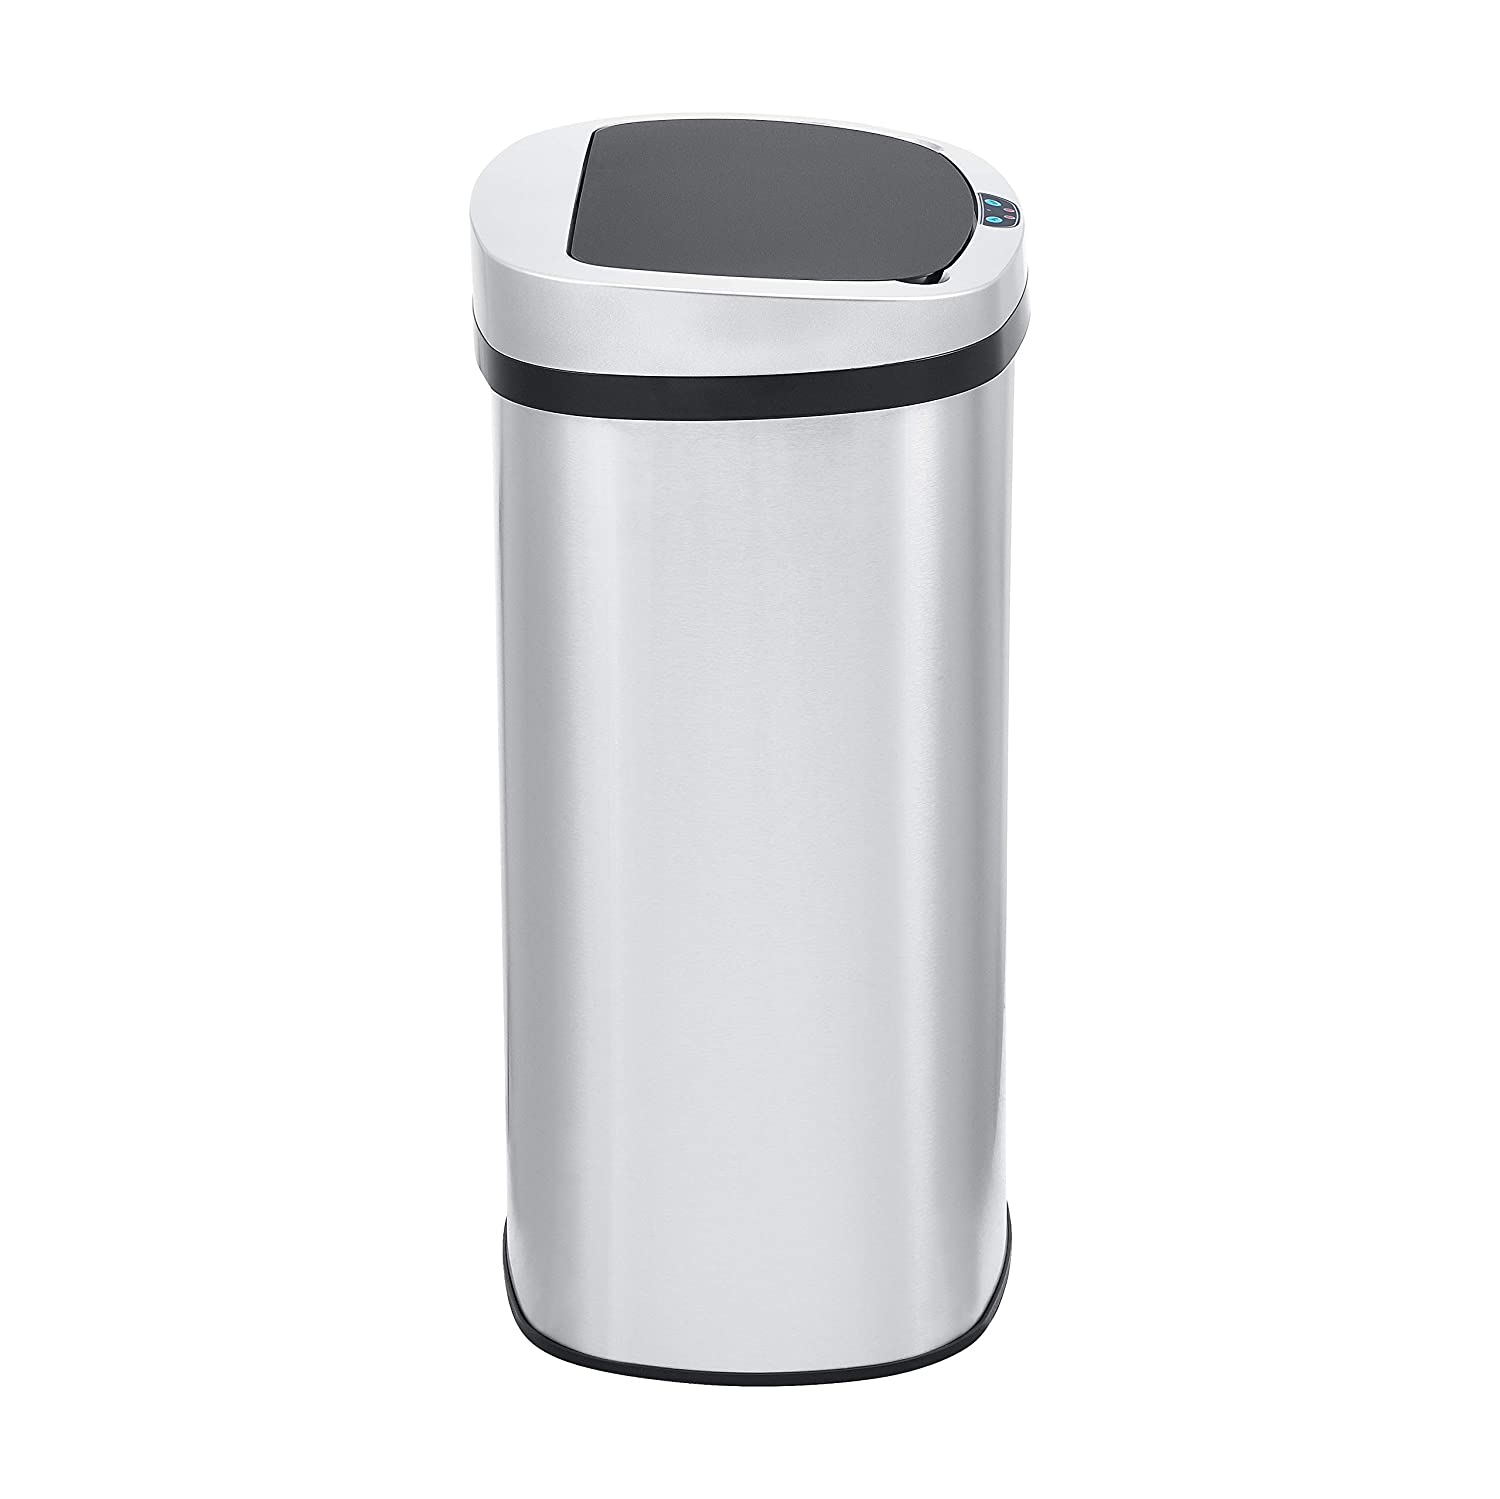  13 Gallon Trash Can Kitchen Trash Can, Motion Sensor Trash Can  13 Gallon Tall Kitchen Waste Bins Trash Bins, Kitchen Garbage Can 13 Gallon  Automatic Trash Can with Lid Stainless Steel